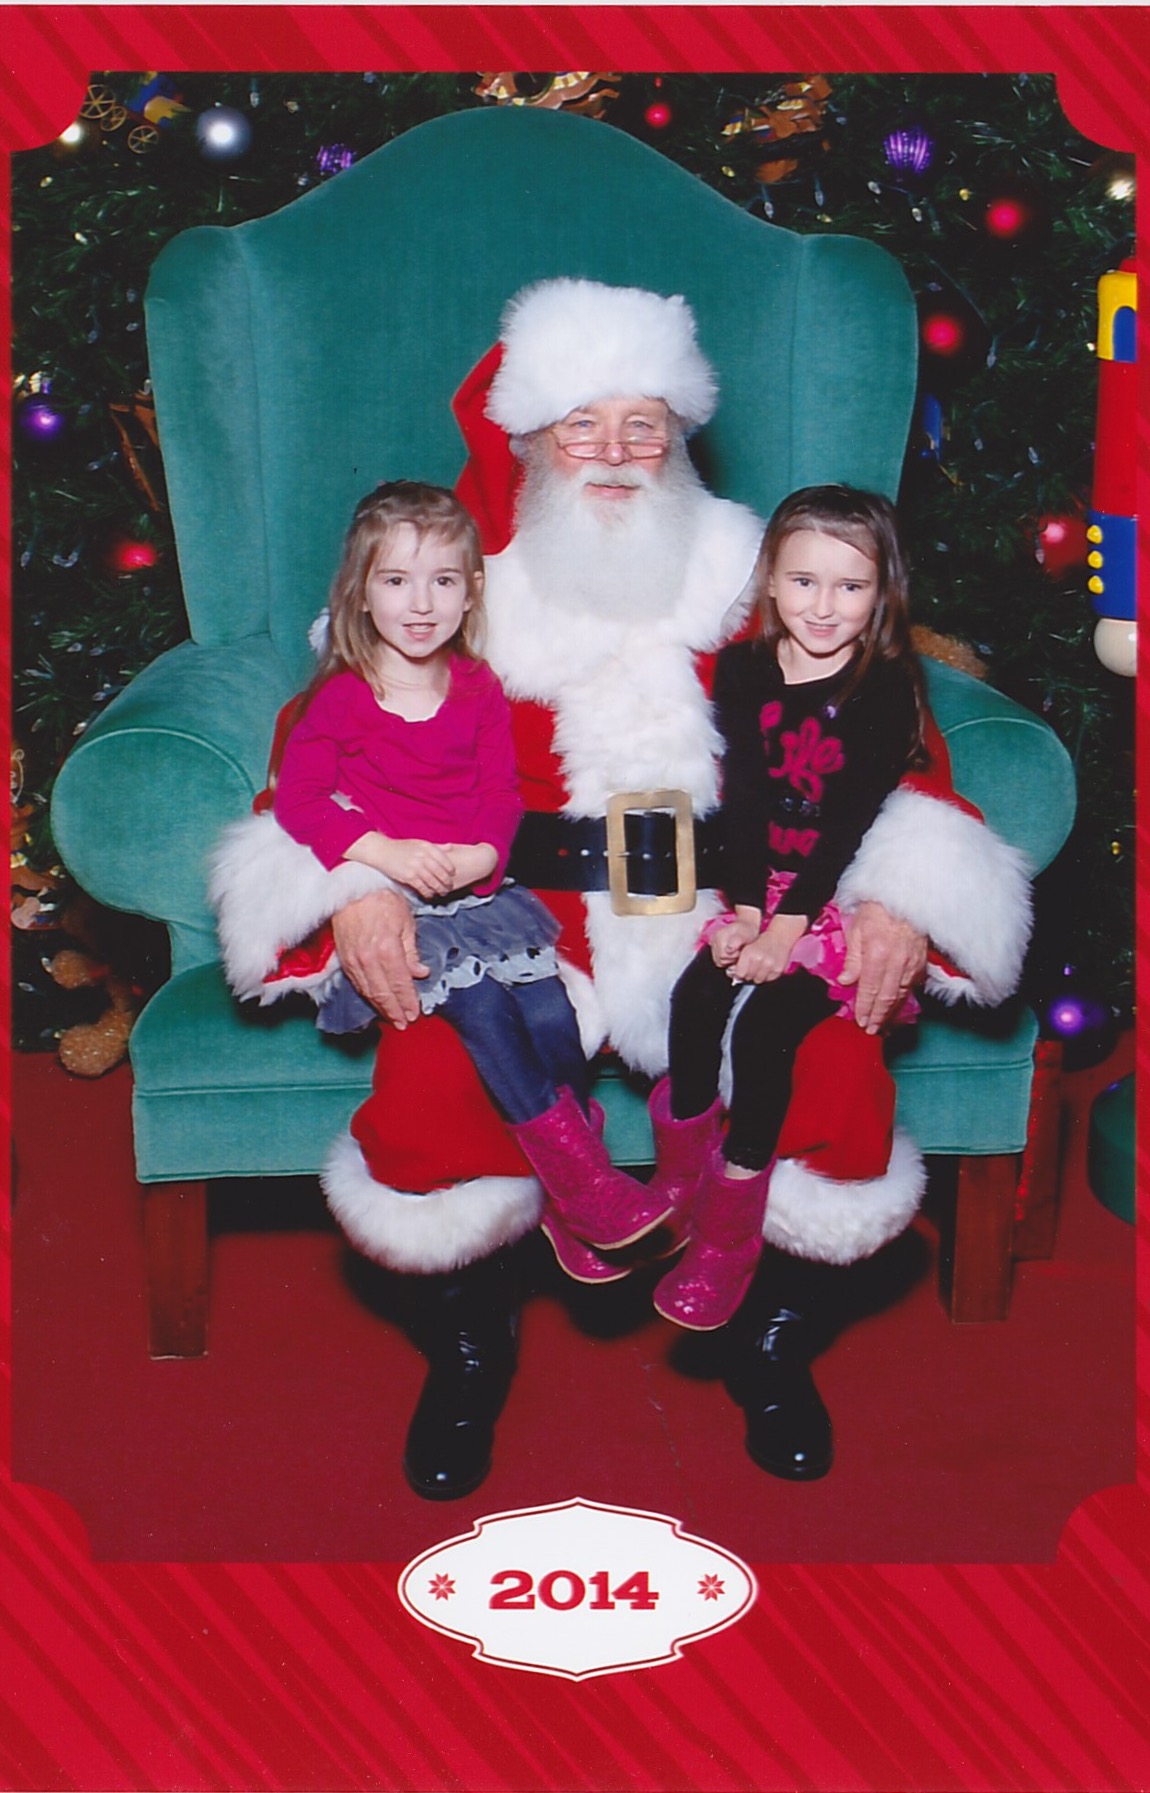 The Girls with Santa 2014